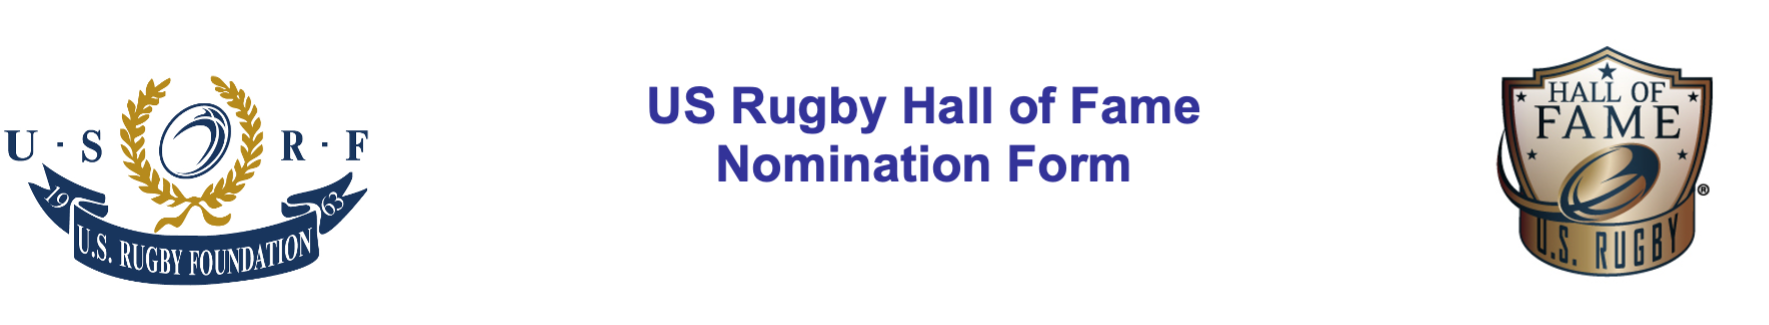 2021-10-06 US Rugby Hall of Fame Header w Logos (Final)